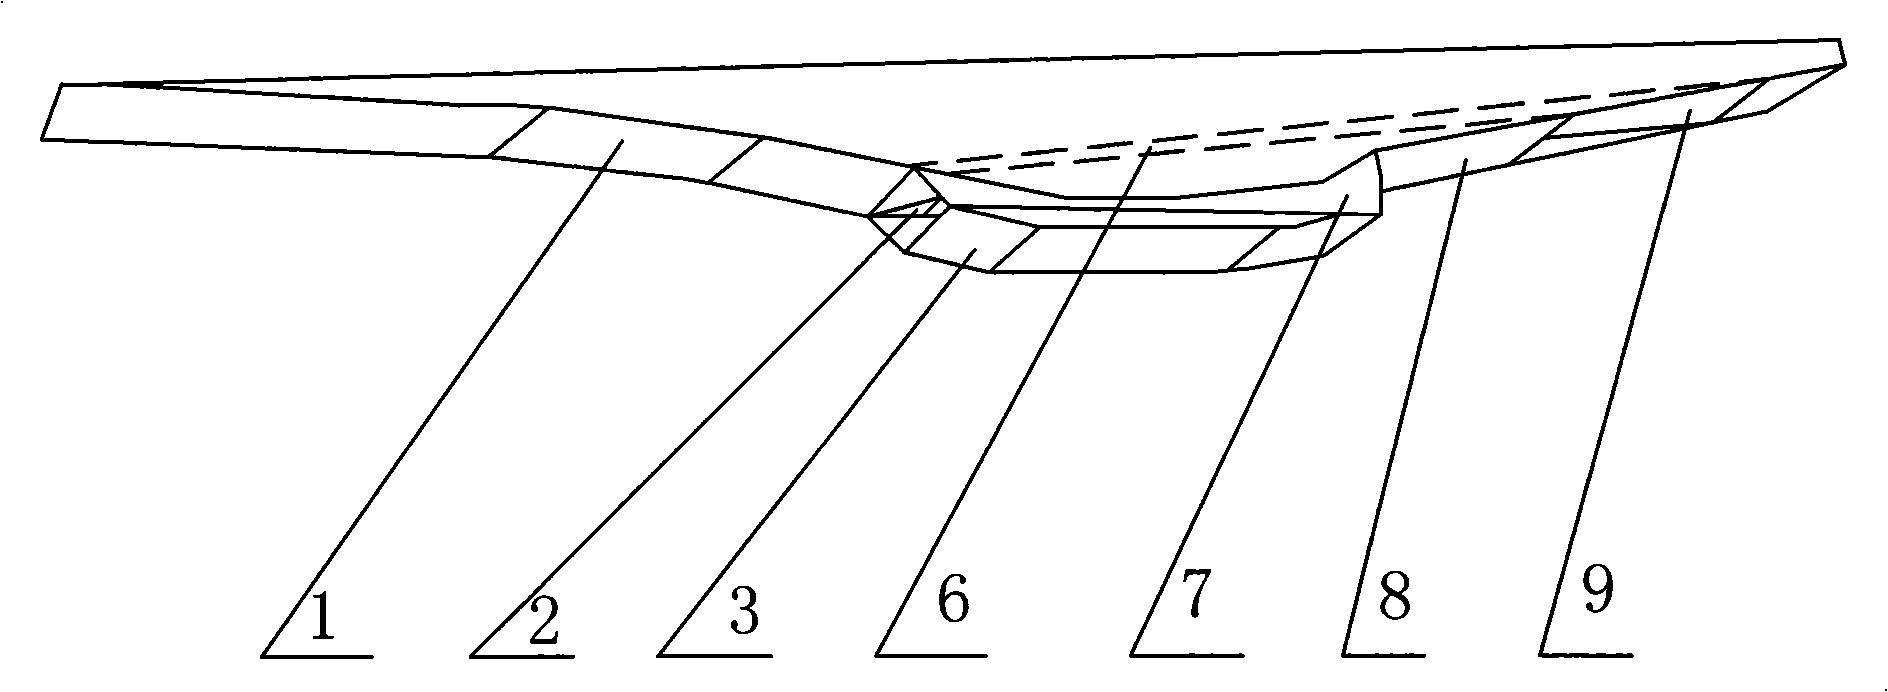 Intake and exhaust device of air breathing supersonic/hypersonic aerocraft